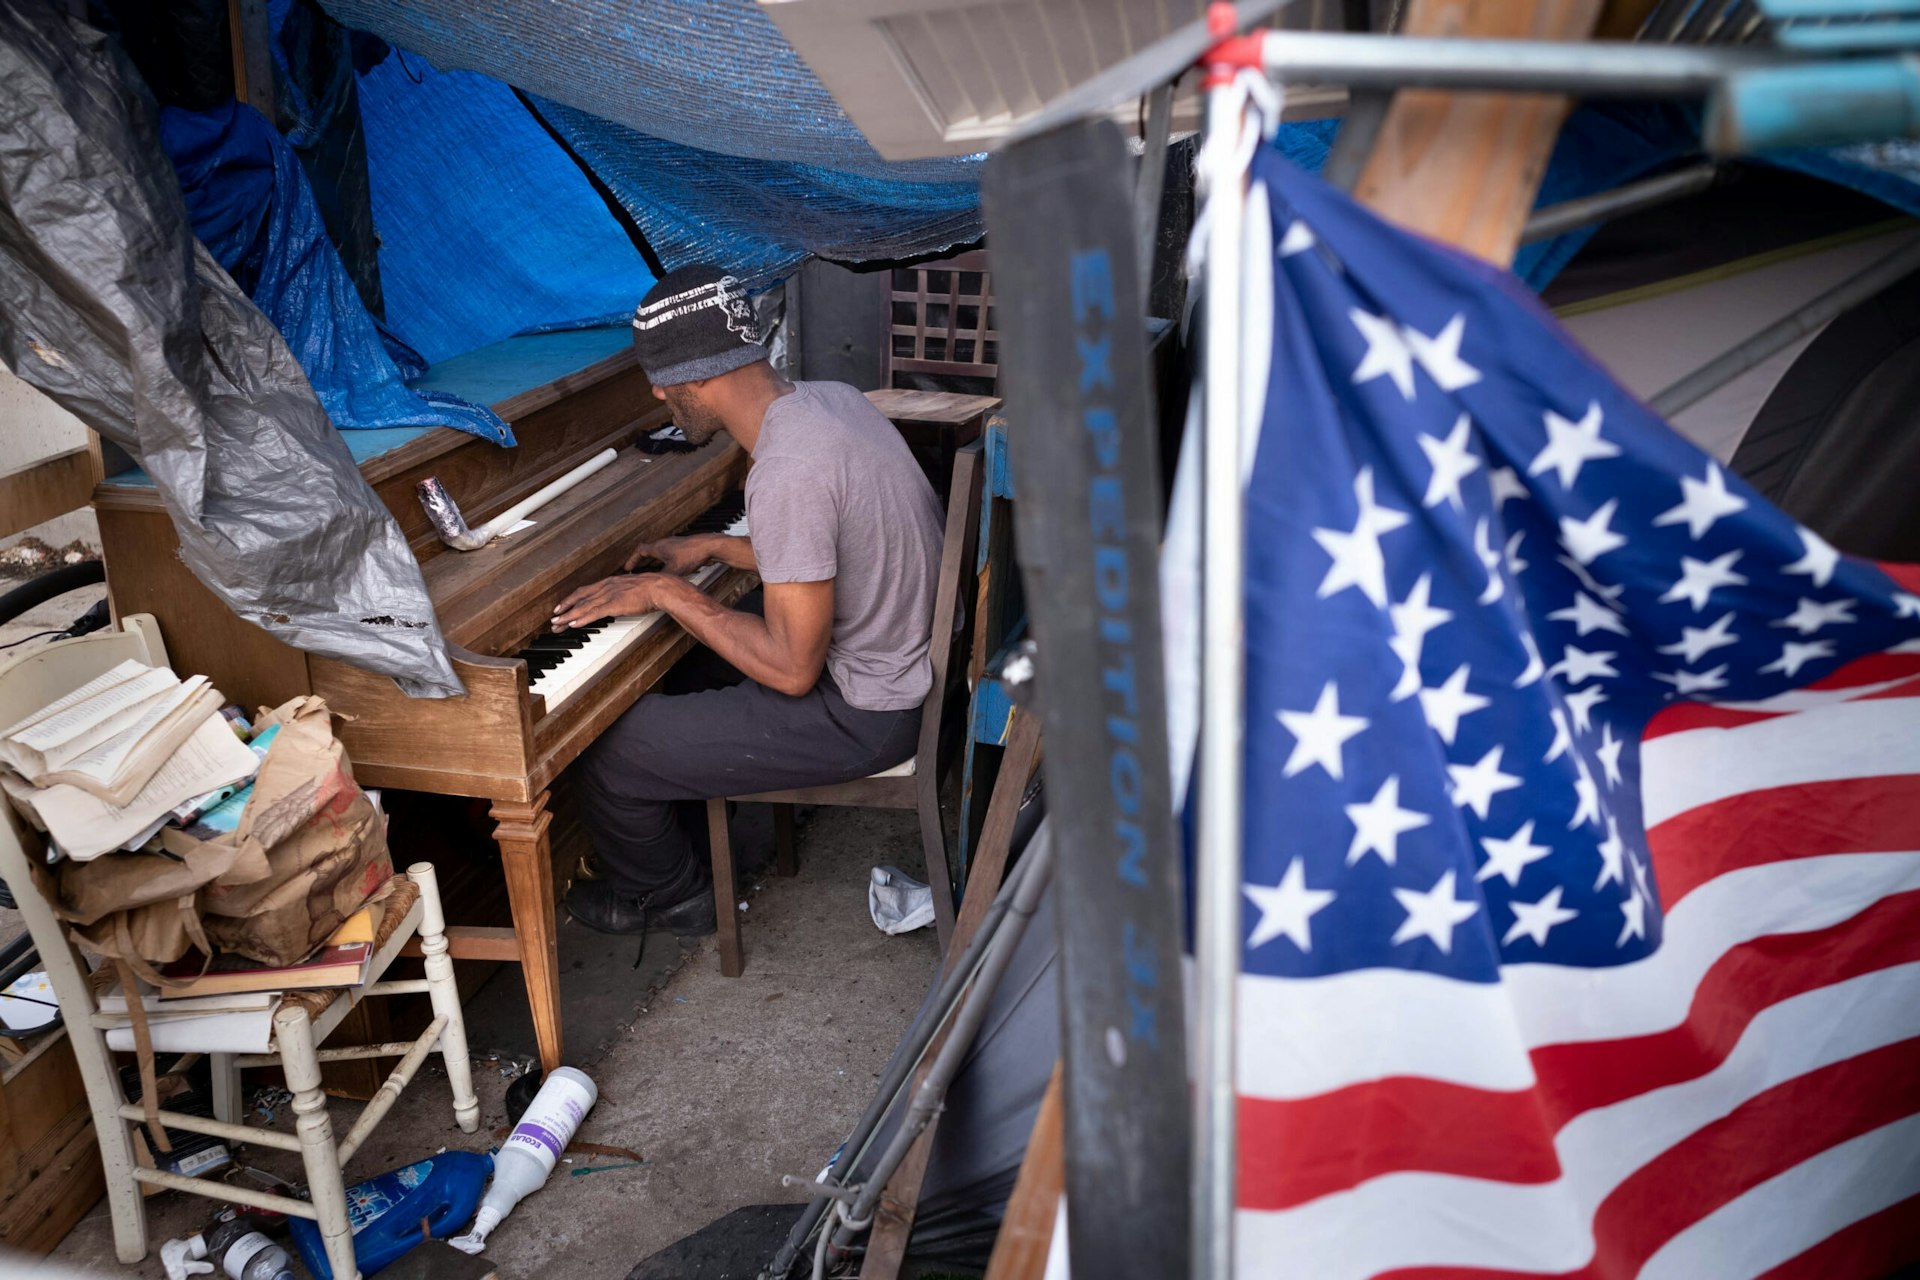 An unhoused man plays an upright piano in a makeshift tent, surrounded by his belongings and with an American flag in the foreground.